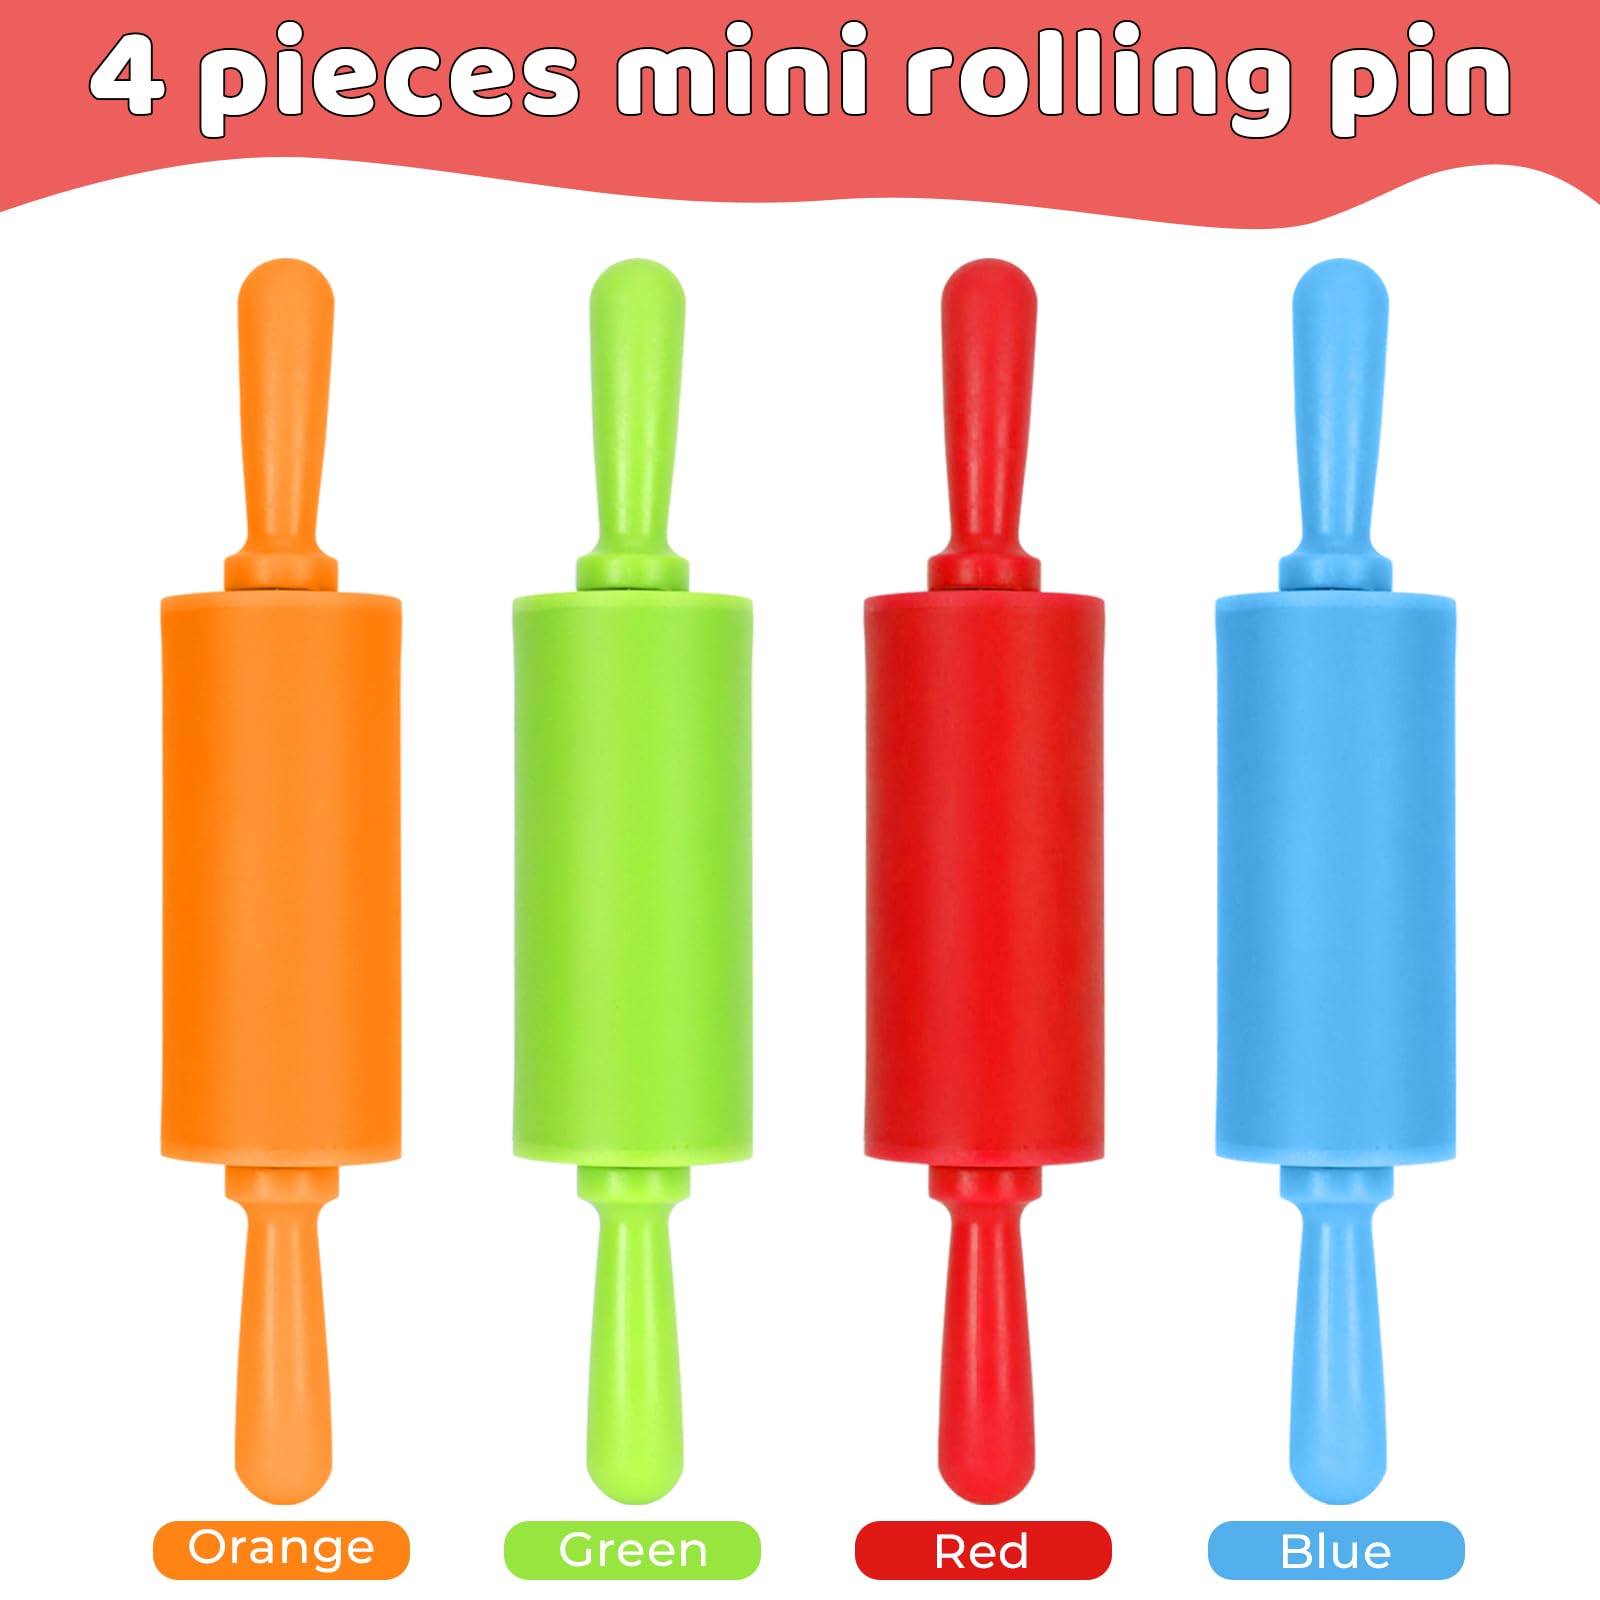 Faxco 4 Pack Mini Rolling Pin for Kids, 9 Inch Plastic Handle Rolling Pin Non-Stick Silicone Rolling Pins for Children Cake Baking